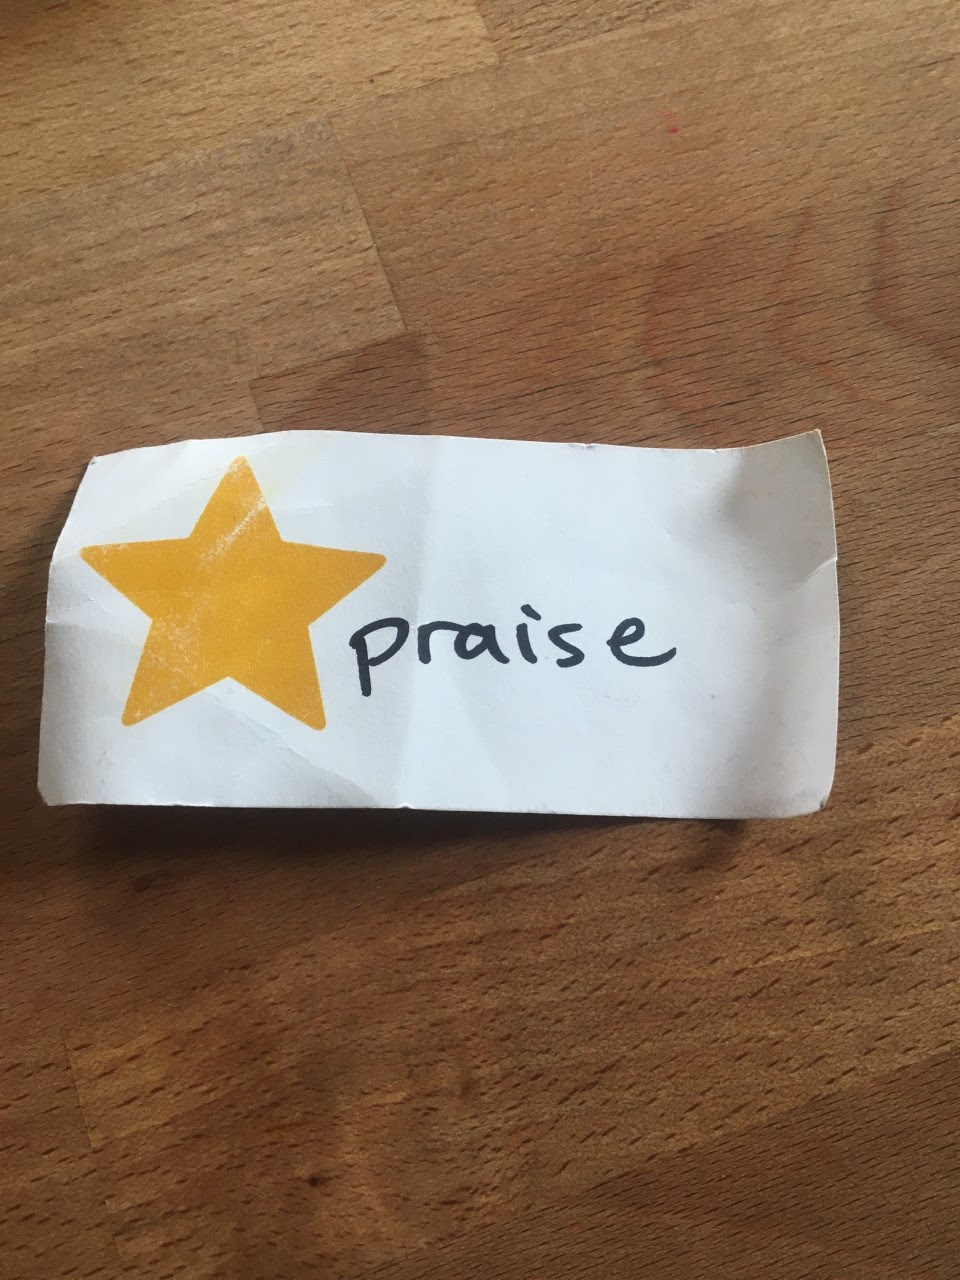 Piece of paper with the word "praise" on it